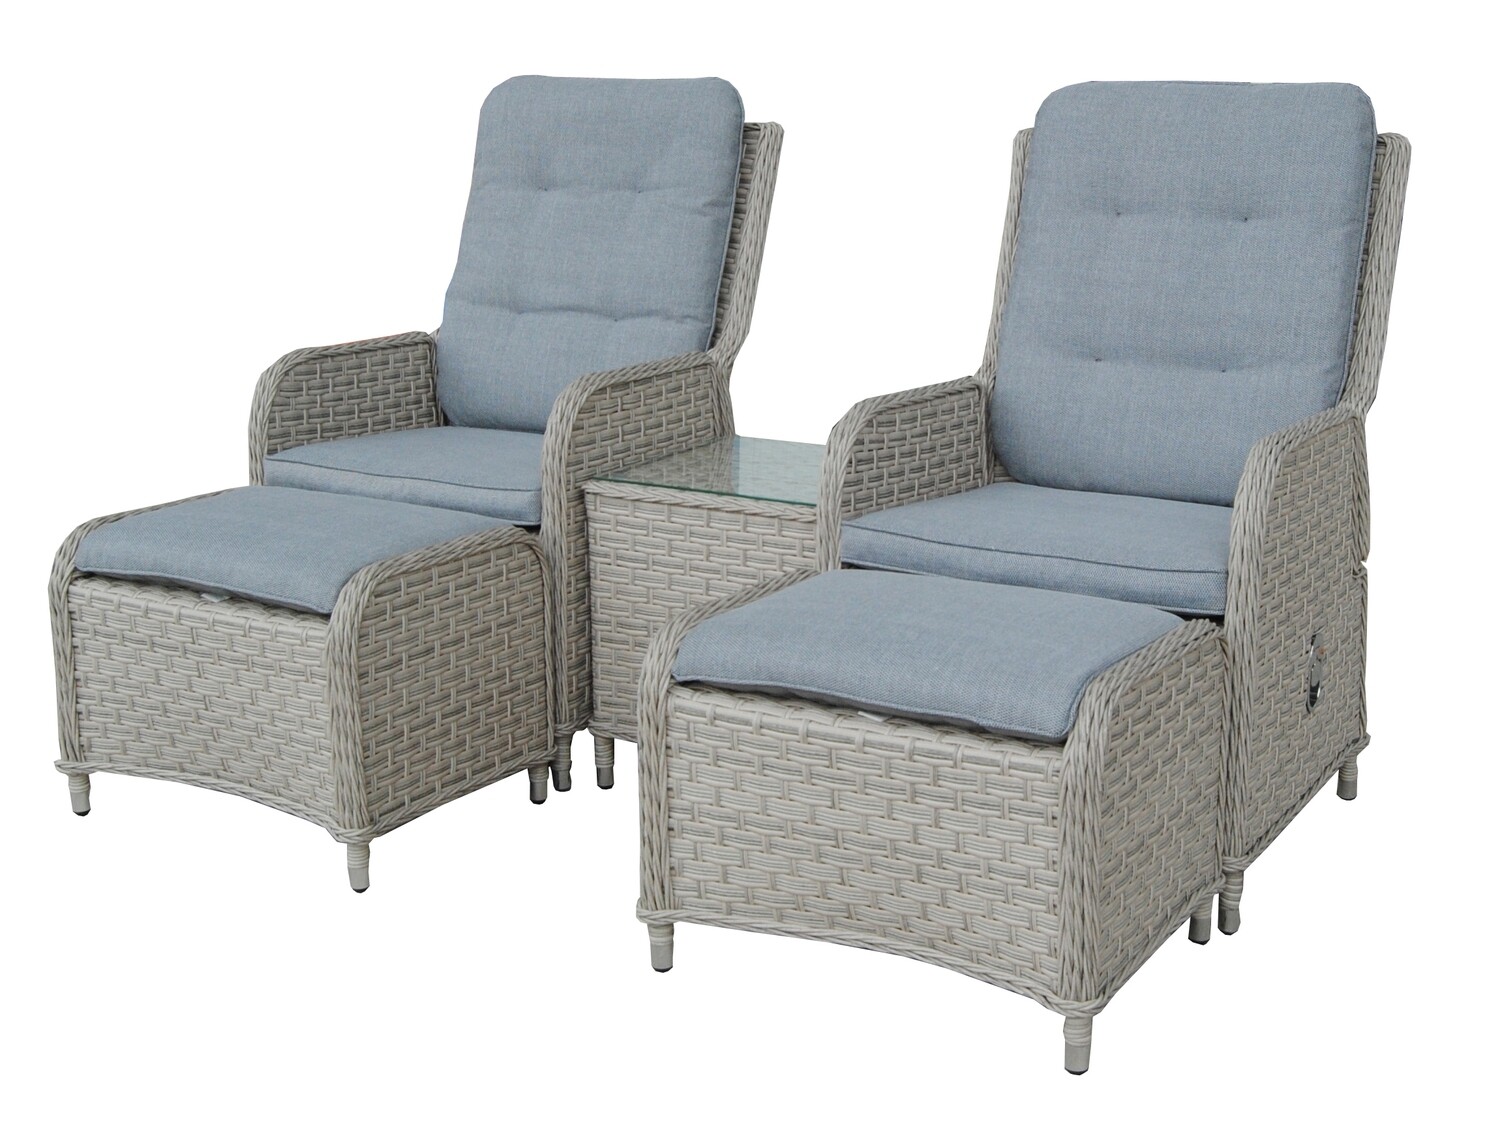 DORSET TURIN DUAL RECLINER SET WITH FOOTRESTS